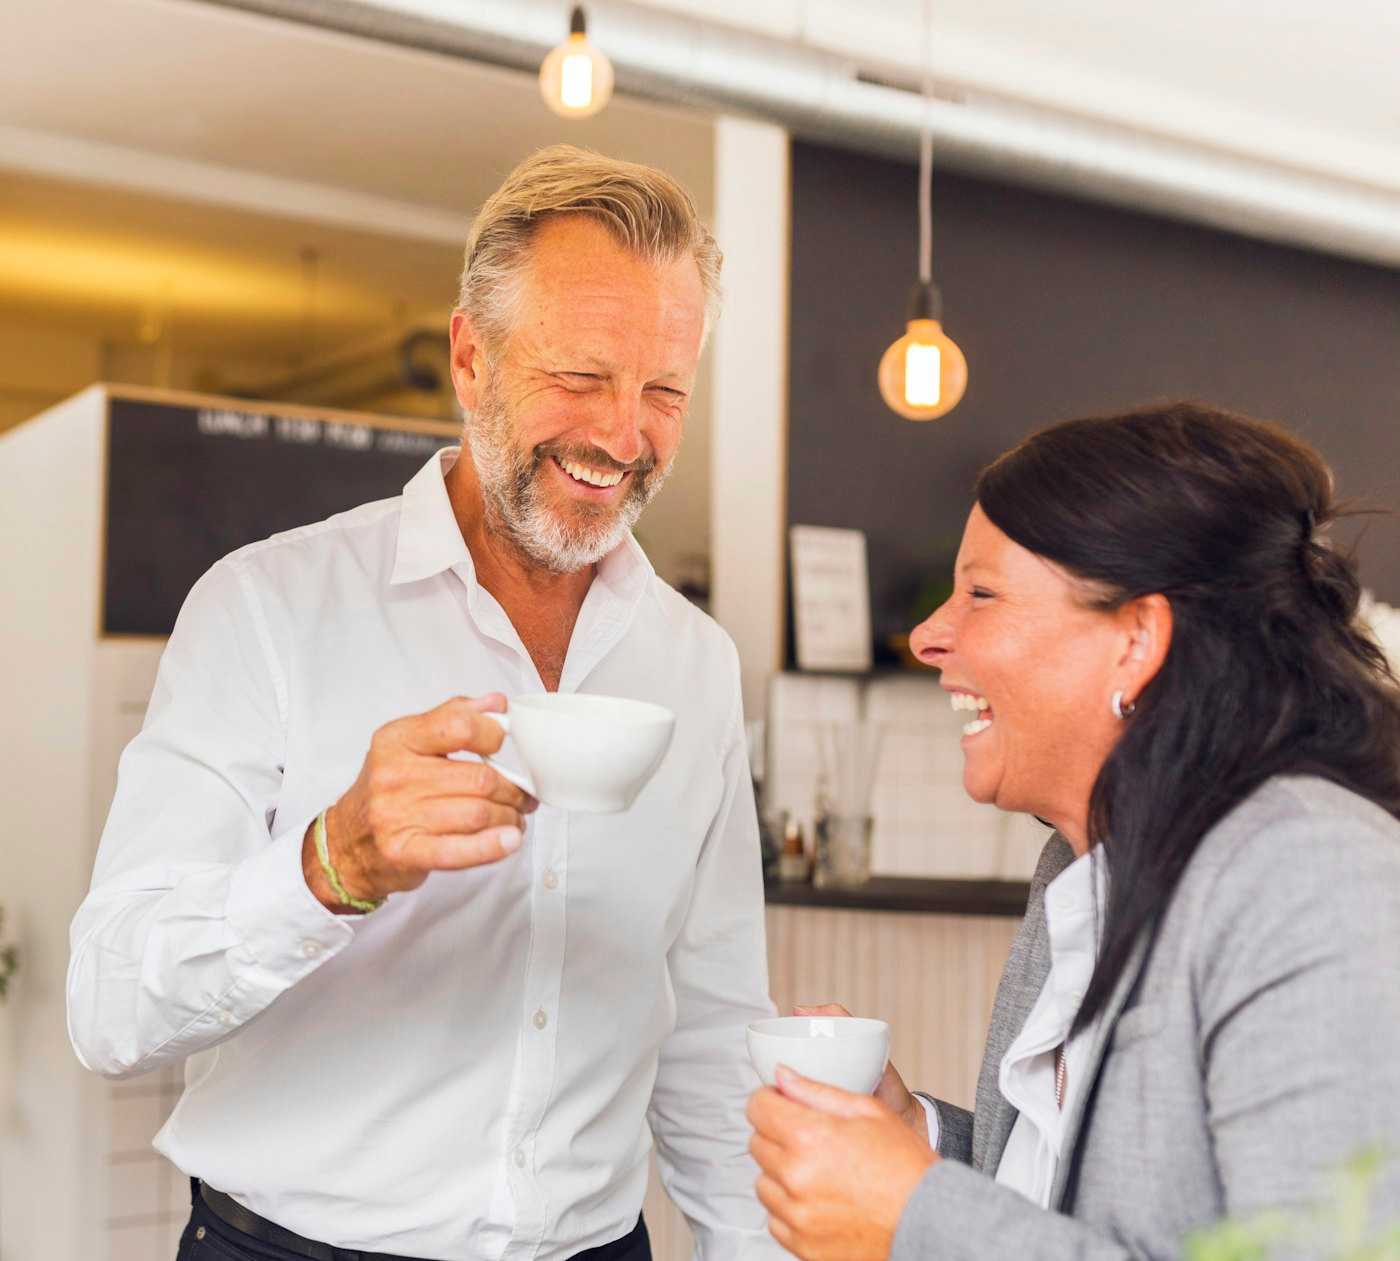 Two colleagues sharing a laugh over coffee | Belong Creative